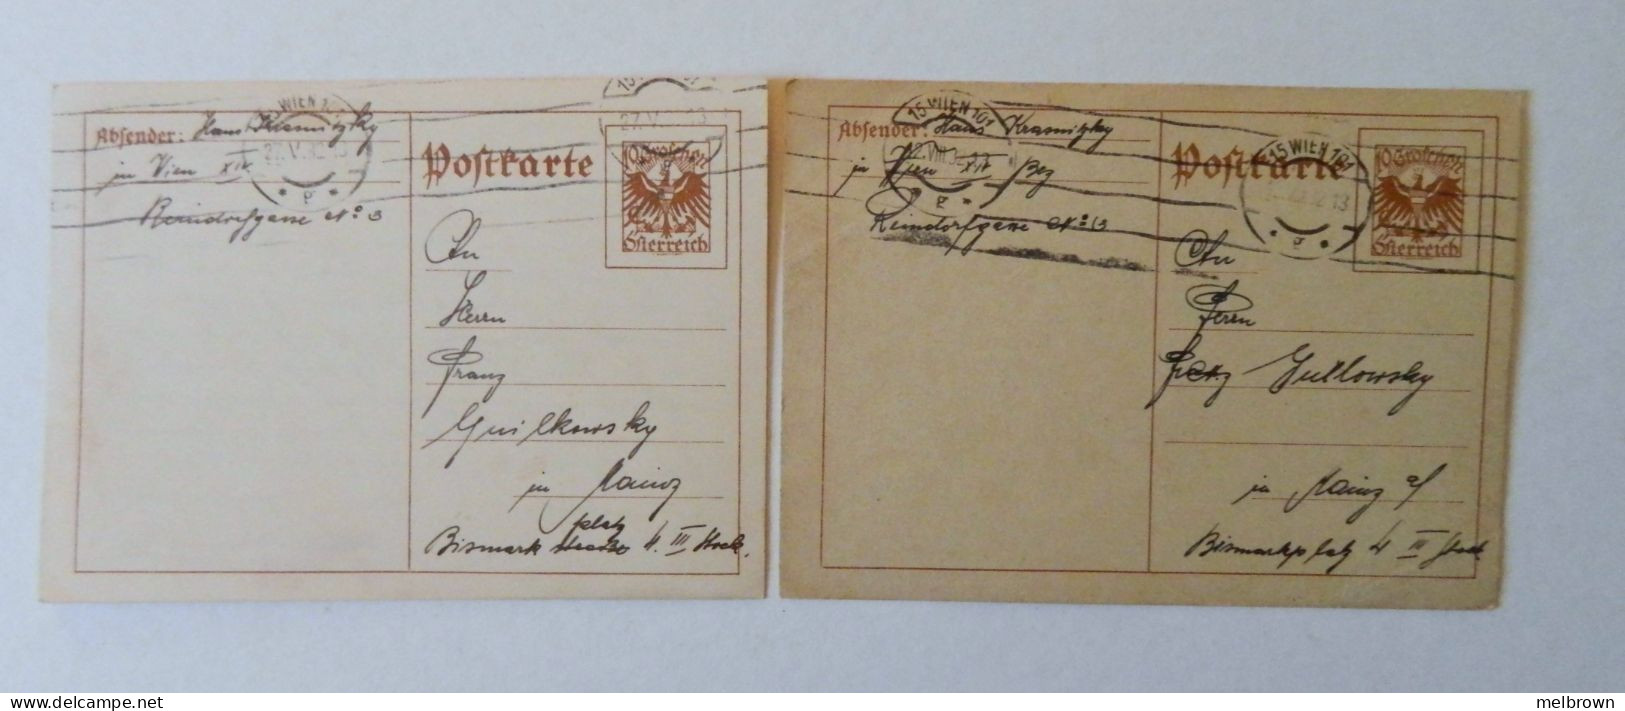 AUSTRIA, VIENNA 1932 2 Collectible Stamped Postcards Sent To Germany - Covers & Documents